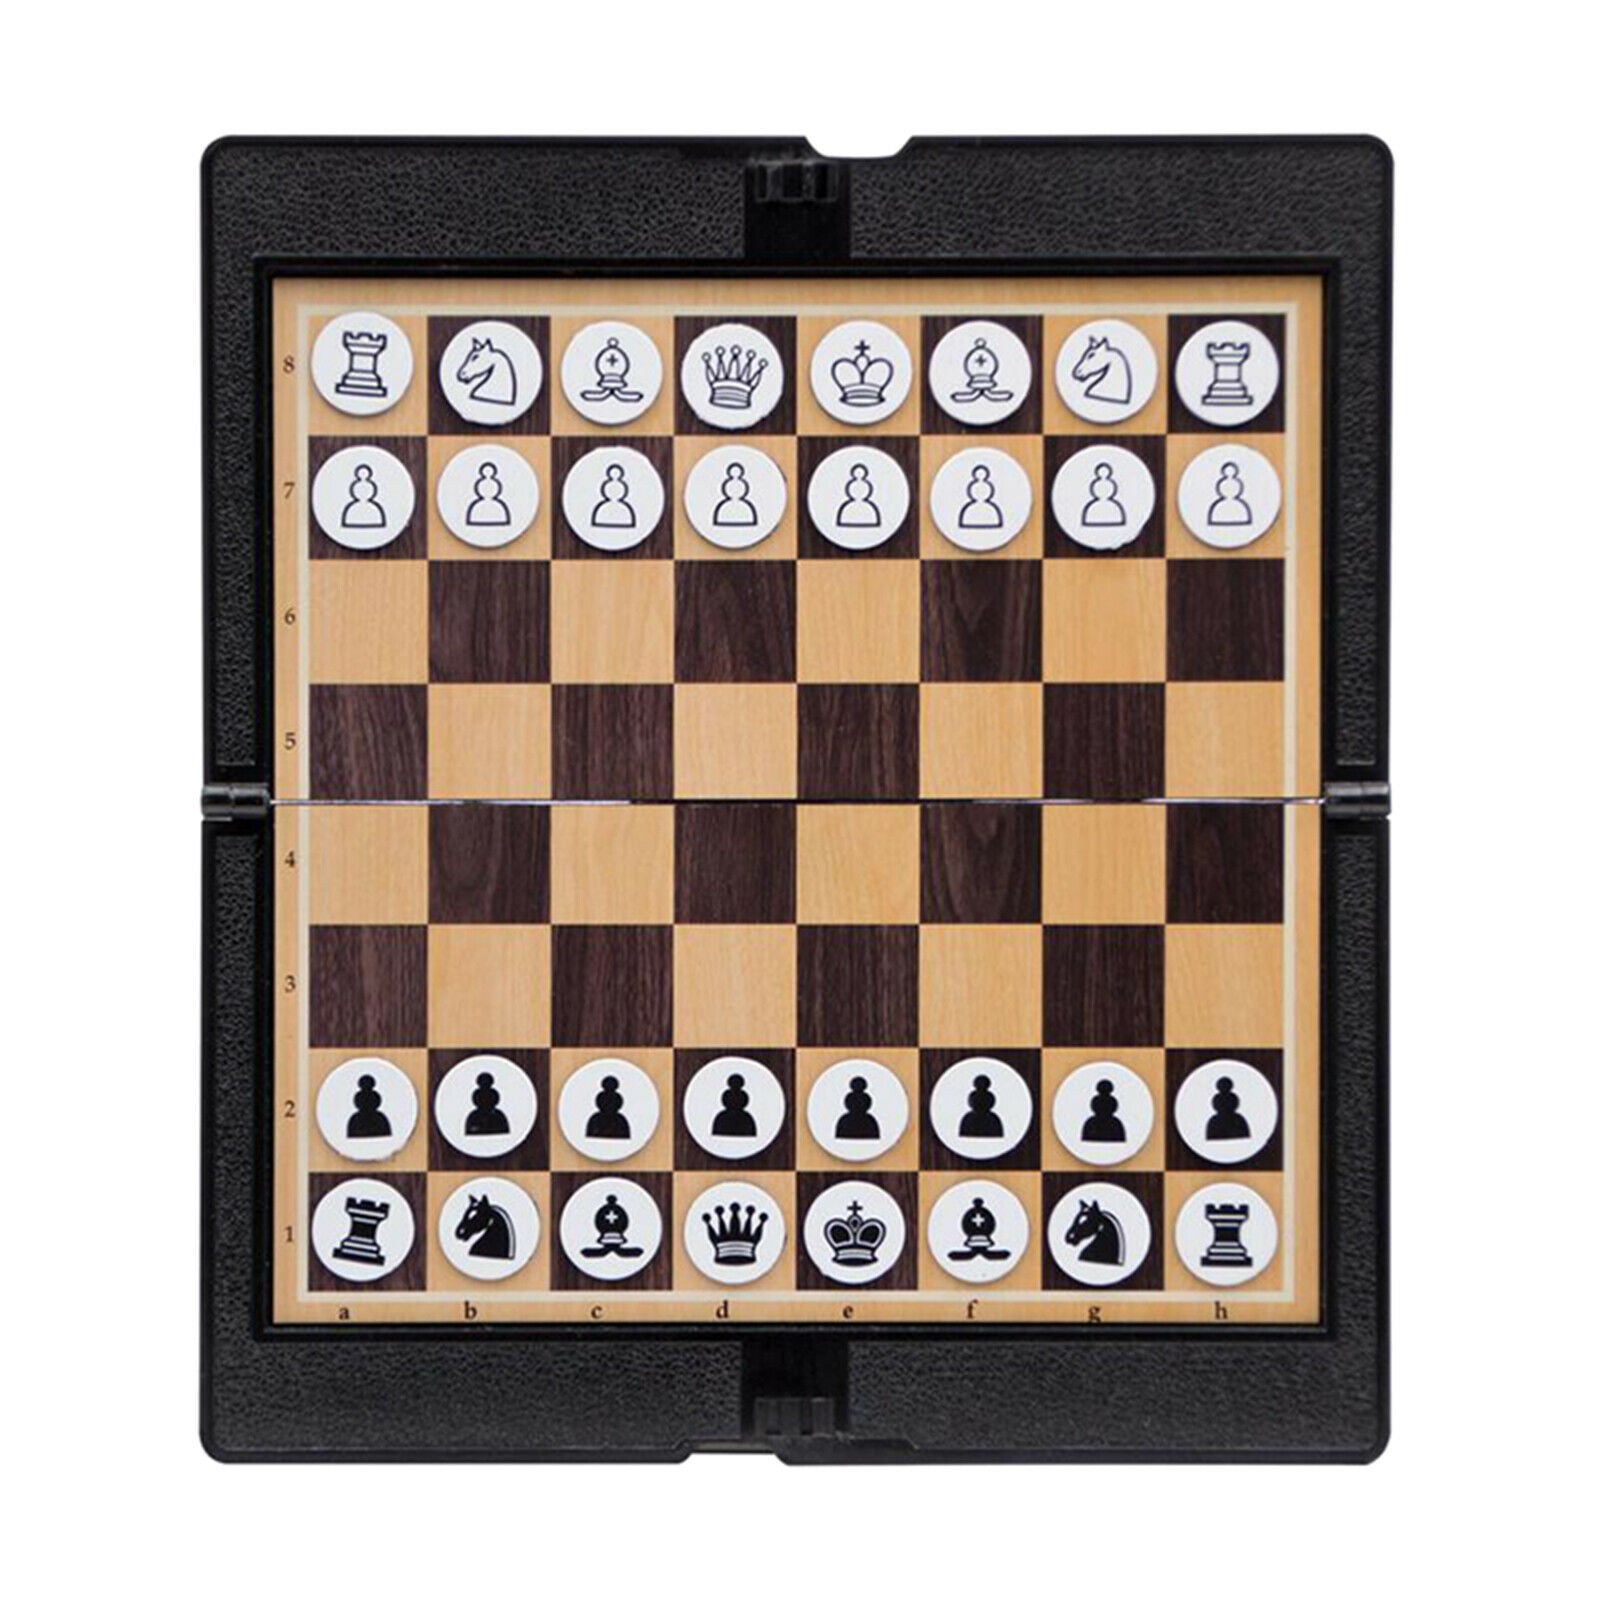 Foldable Chessboard Mini Chess Set Chess Board Game for Camping Family Game